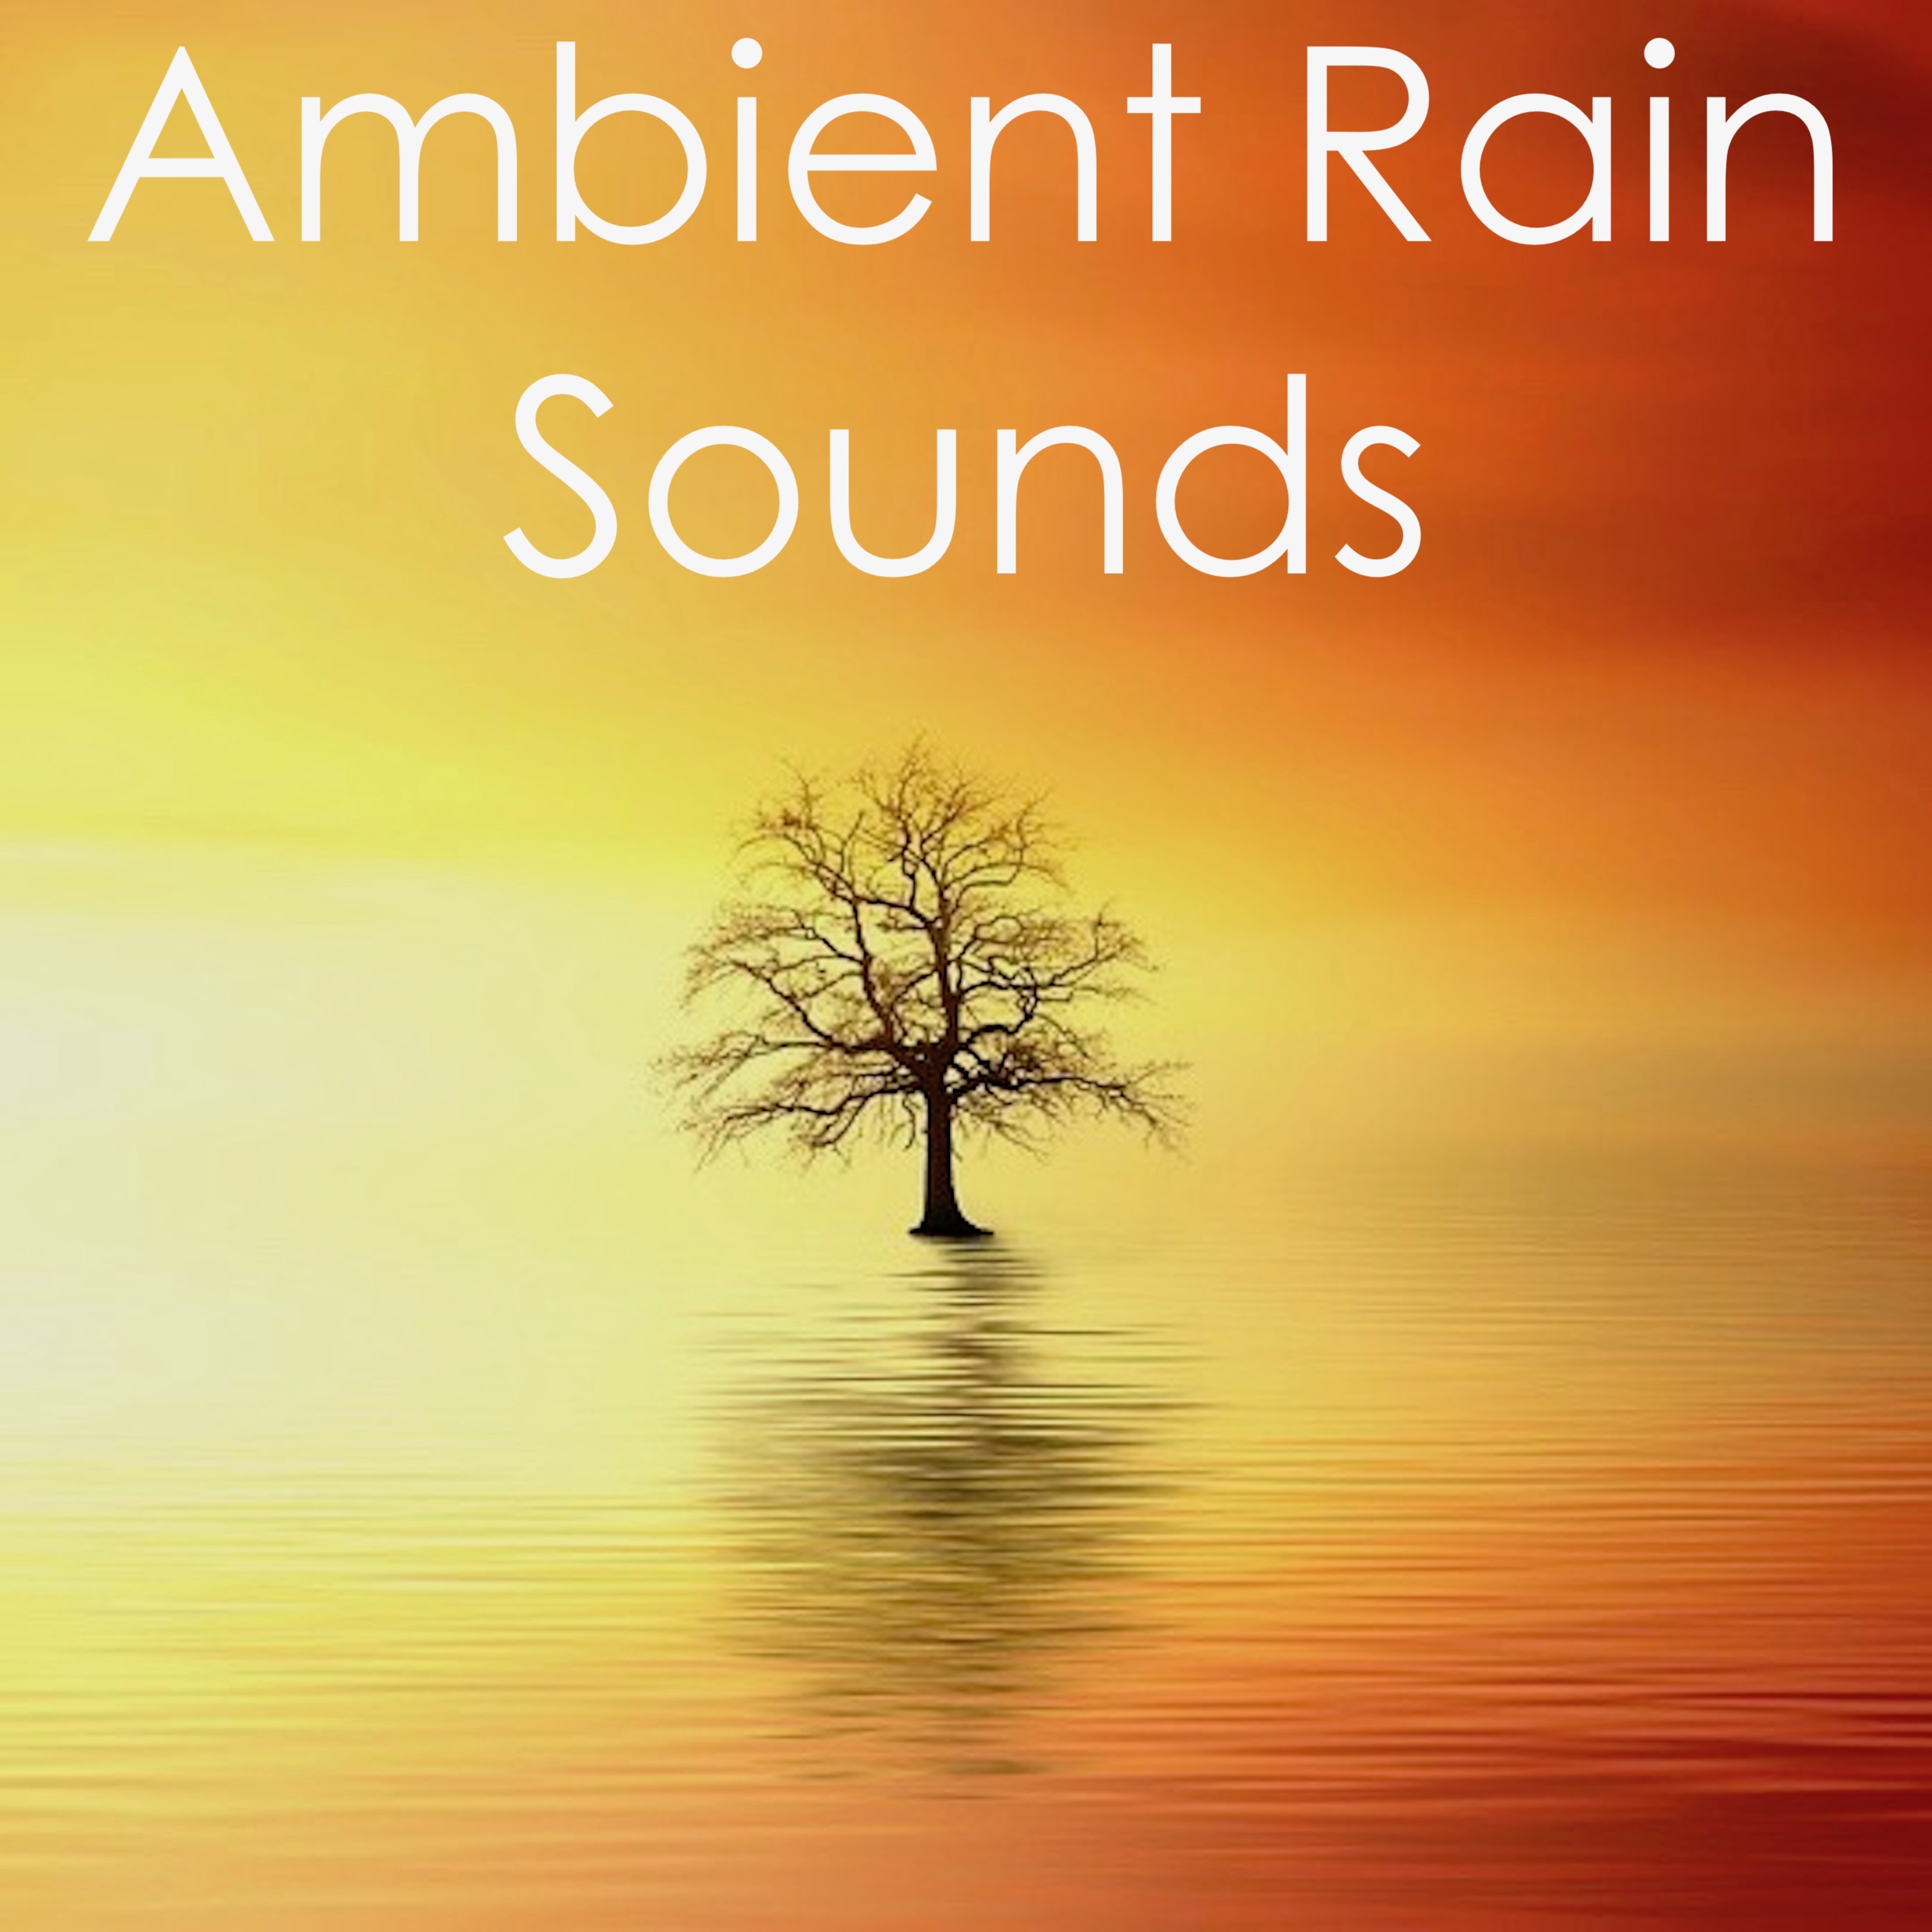 17 Ambient Rain Sounds for Deep Sleep and Natural Yoga Background Music